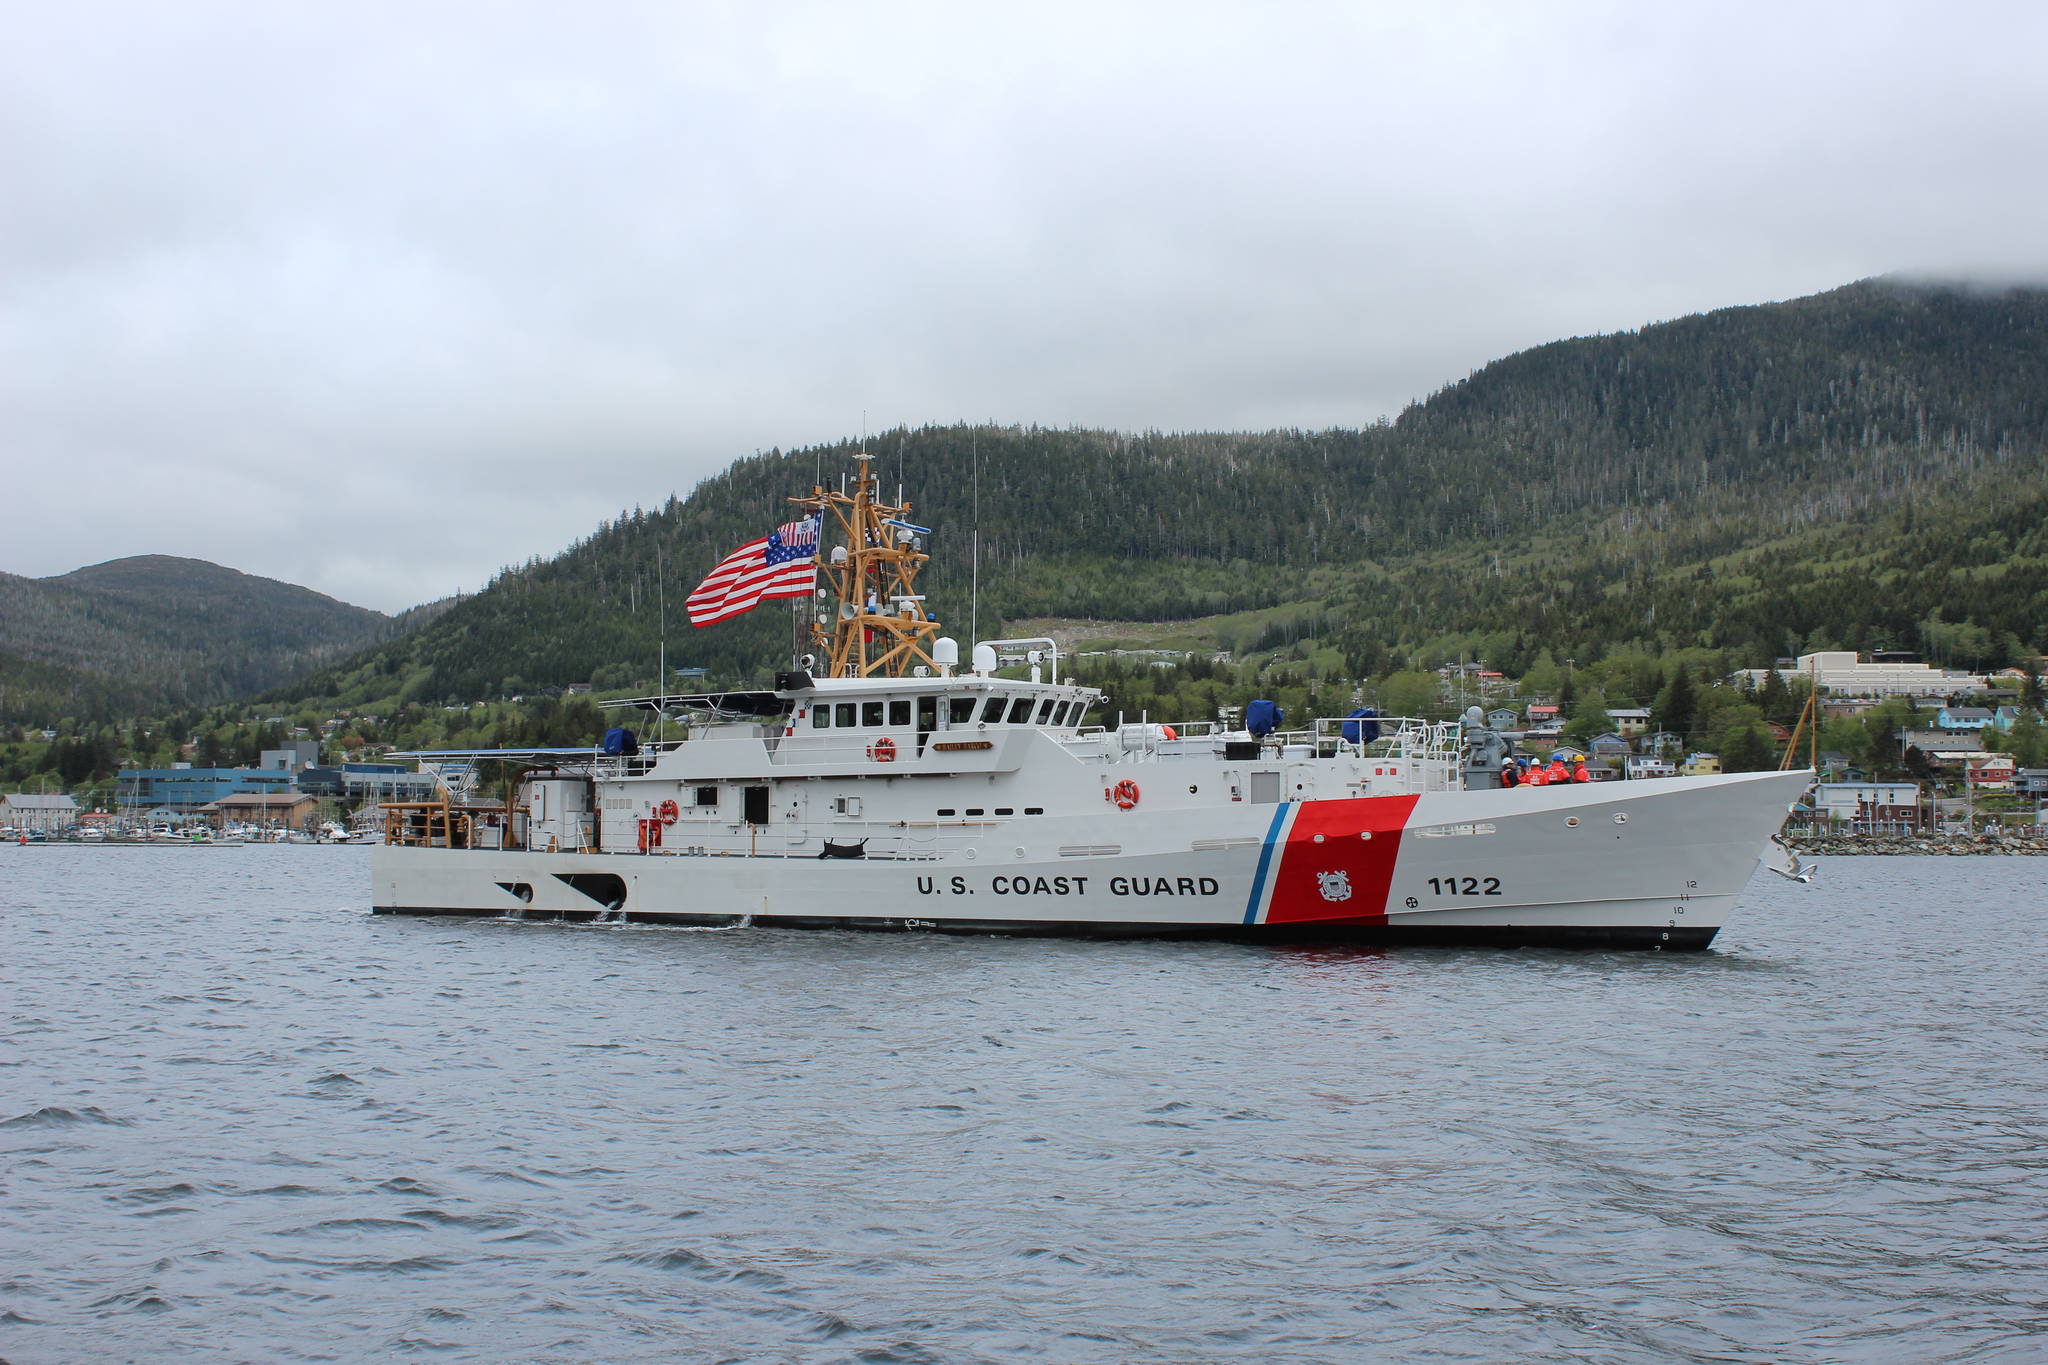 The Coast Guard Cutter Bailey Barco pulls into its home port of Ketchikan on May 12, 2017. The vessel aided in the search for the missing person near Sitka. (U.S. Coast Guard | Courtesy photo)